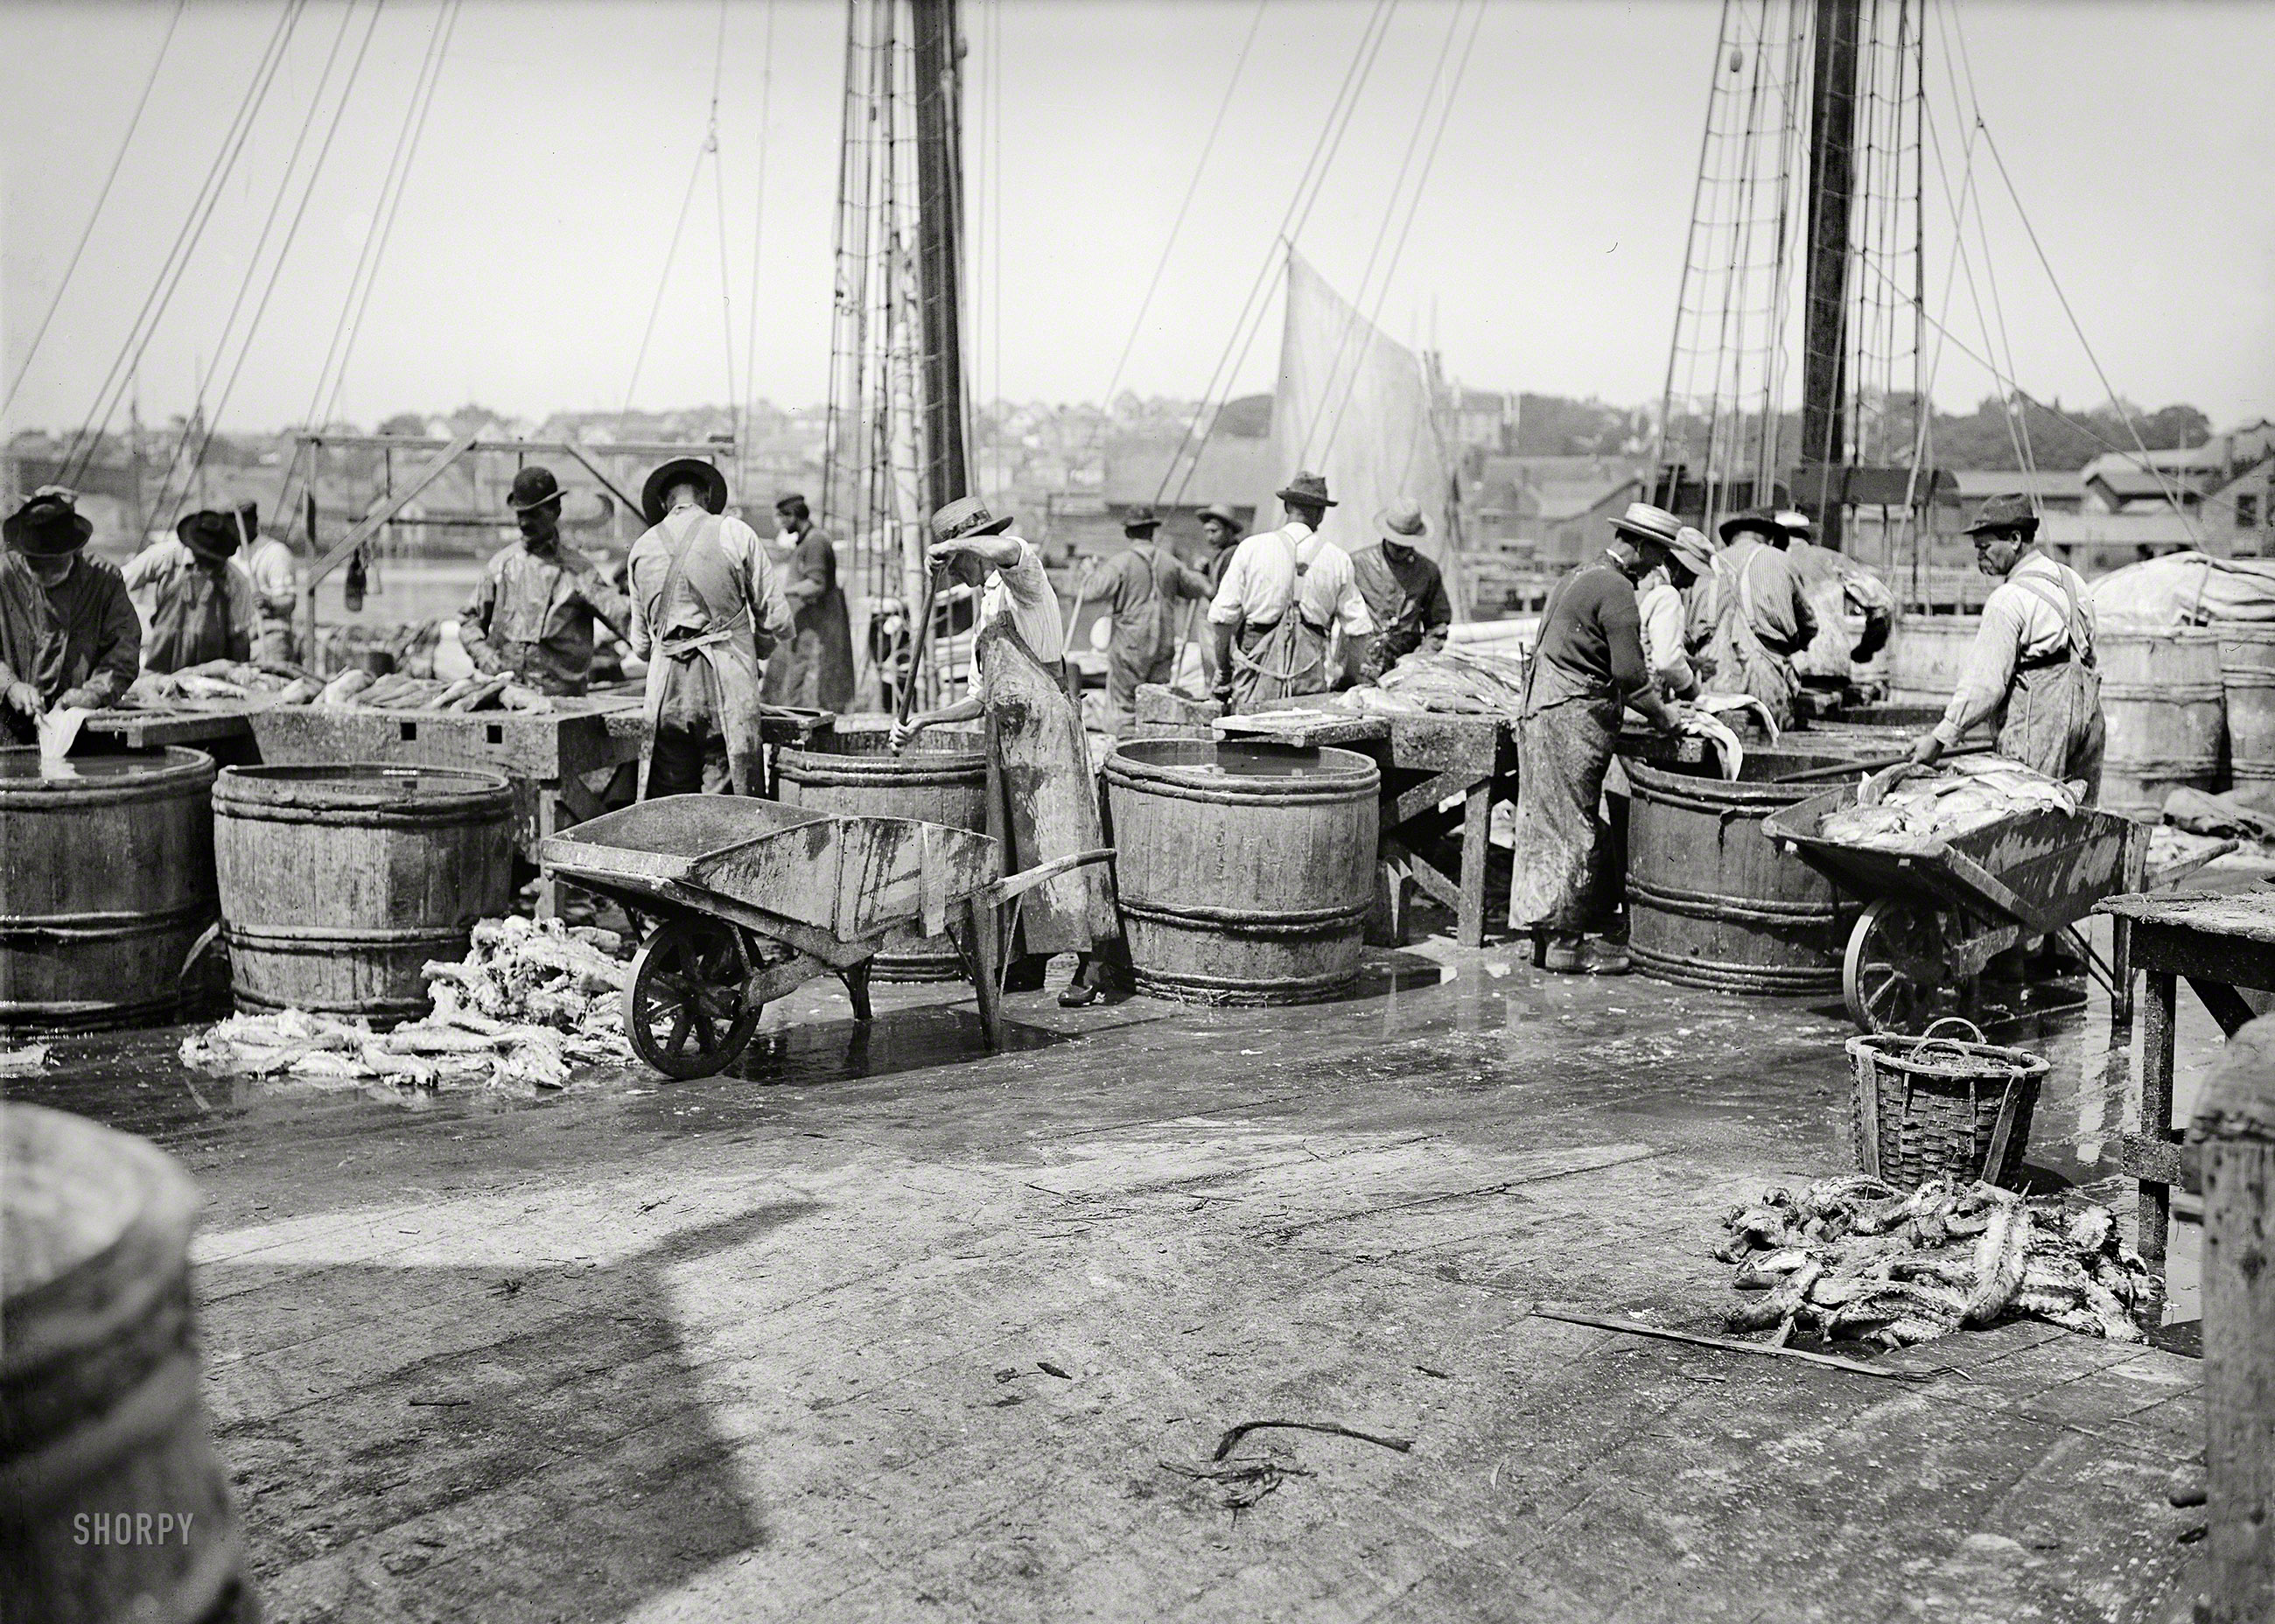 Gloucester, Massachusetts, circa 1903. "Handling a cargo from the fishing banks." 5x7 inch dry plate glass negative, Detroit Publishing Company. View full size.